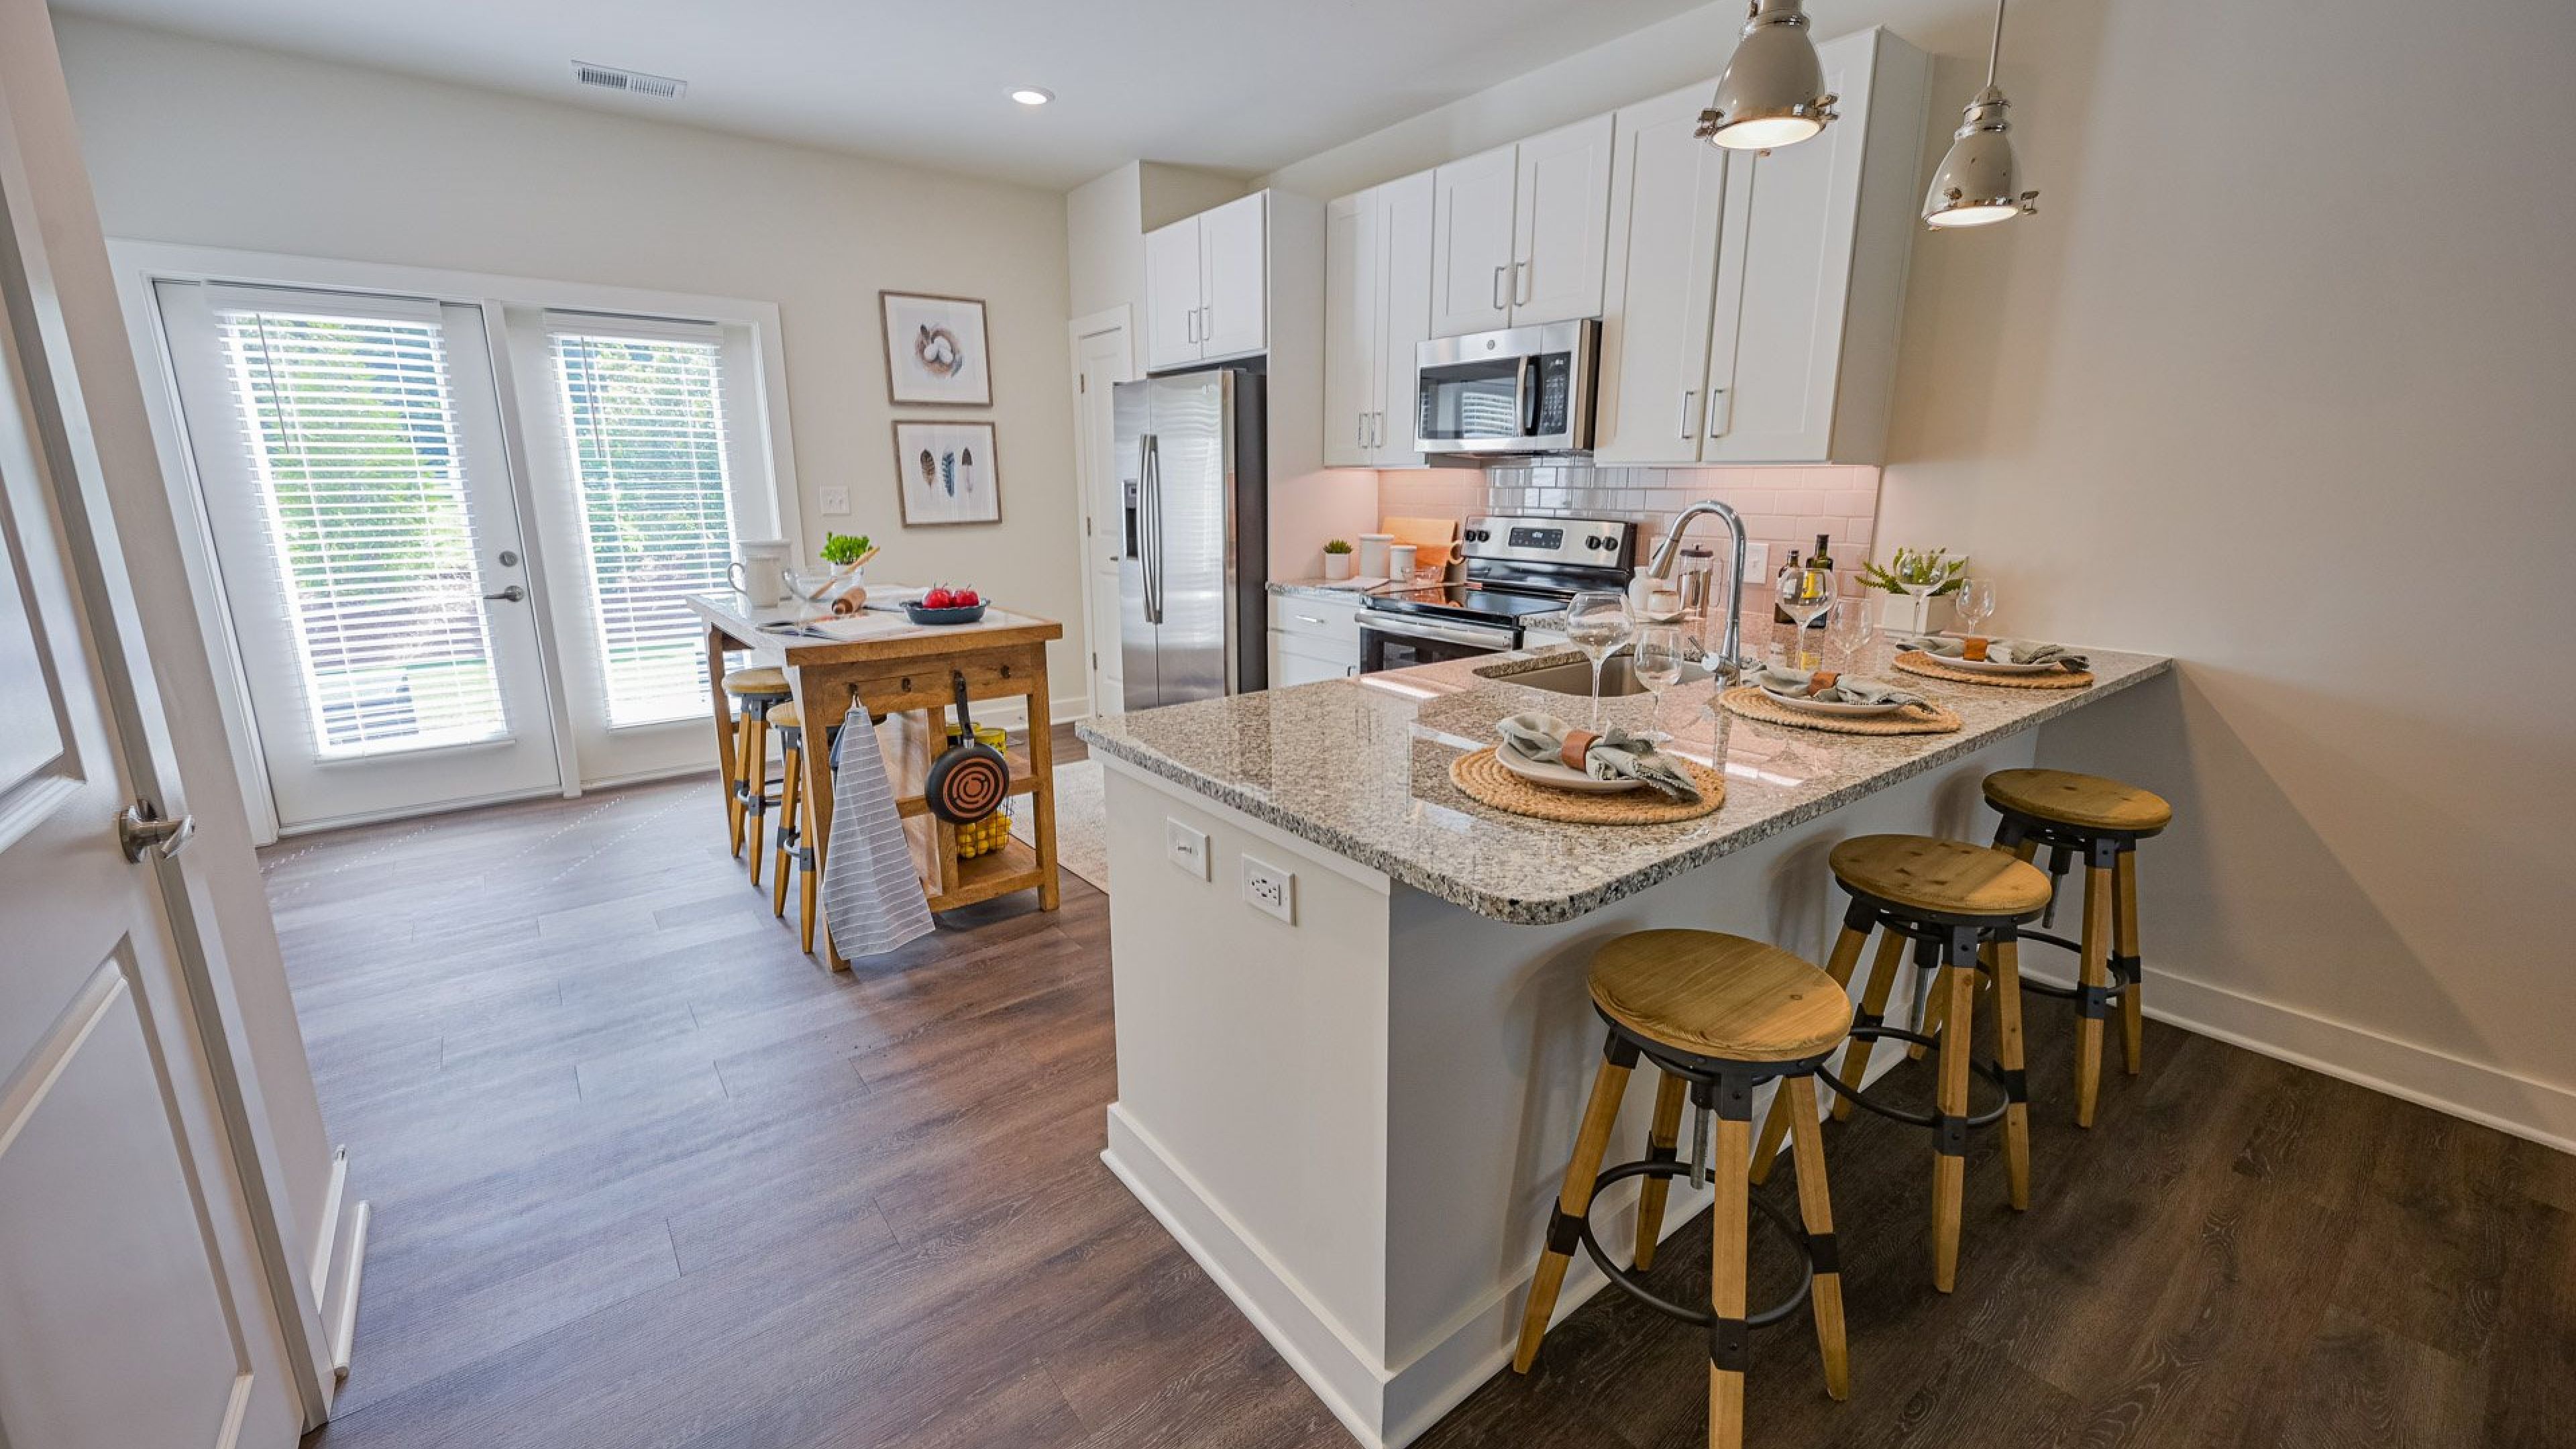 Hawthorne at the Pointe modern apartment kitchen with kitchen island, granite countertops, stainless steel appliances